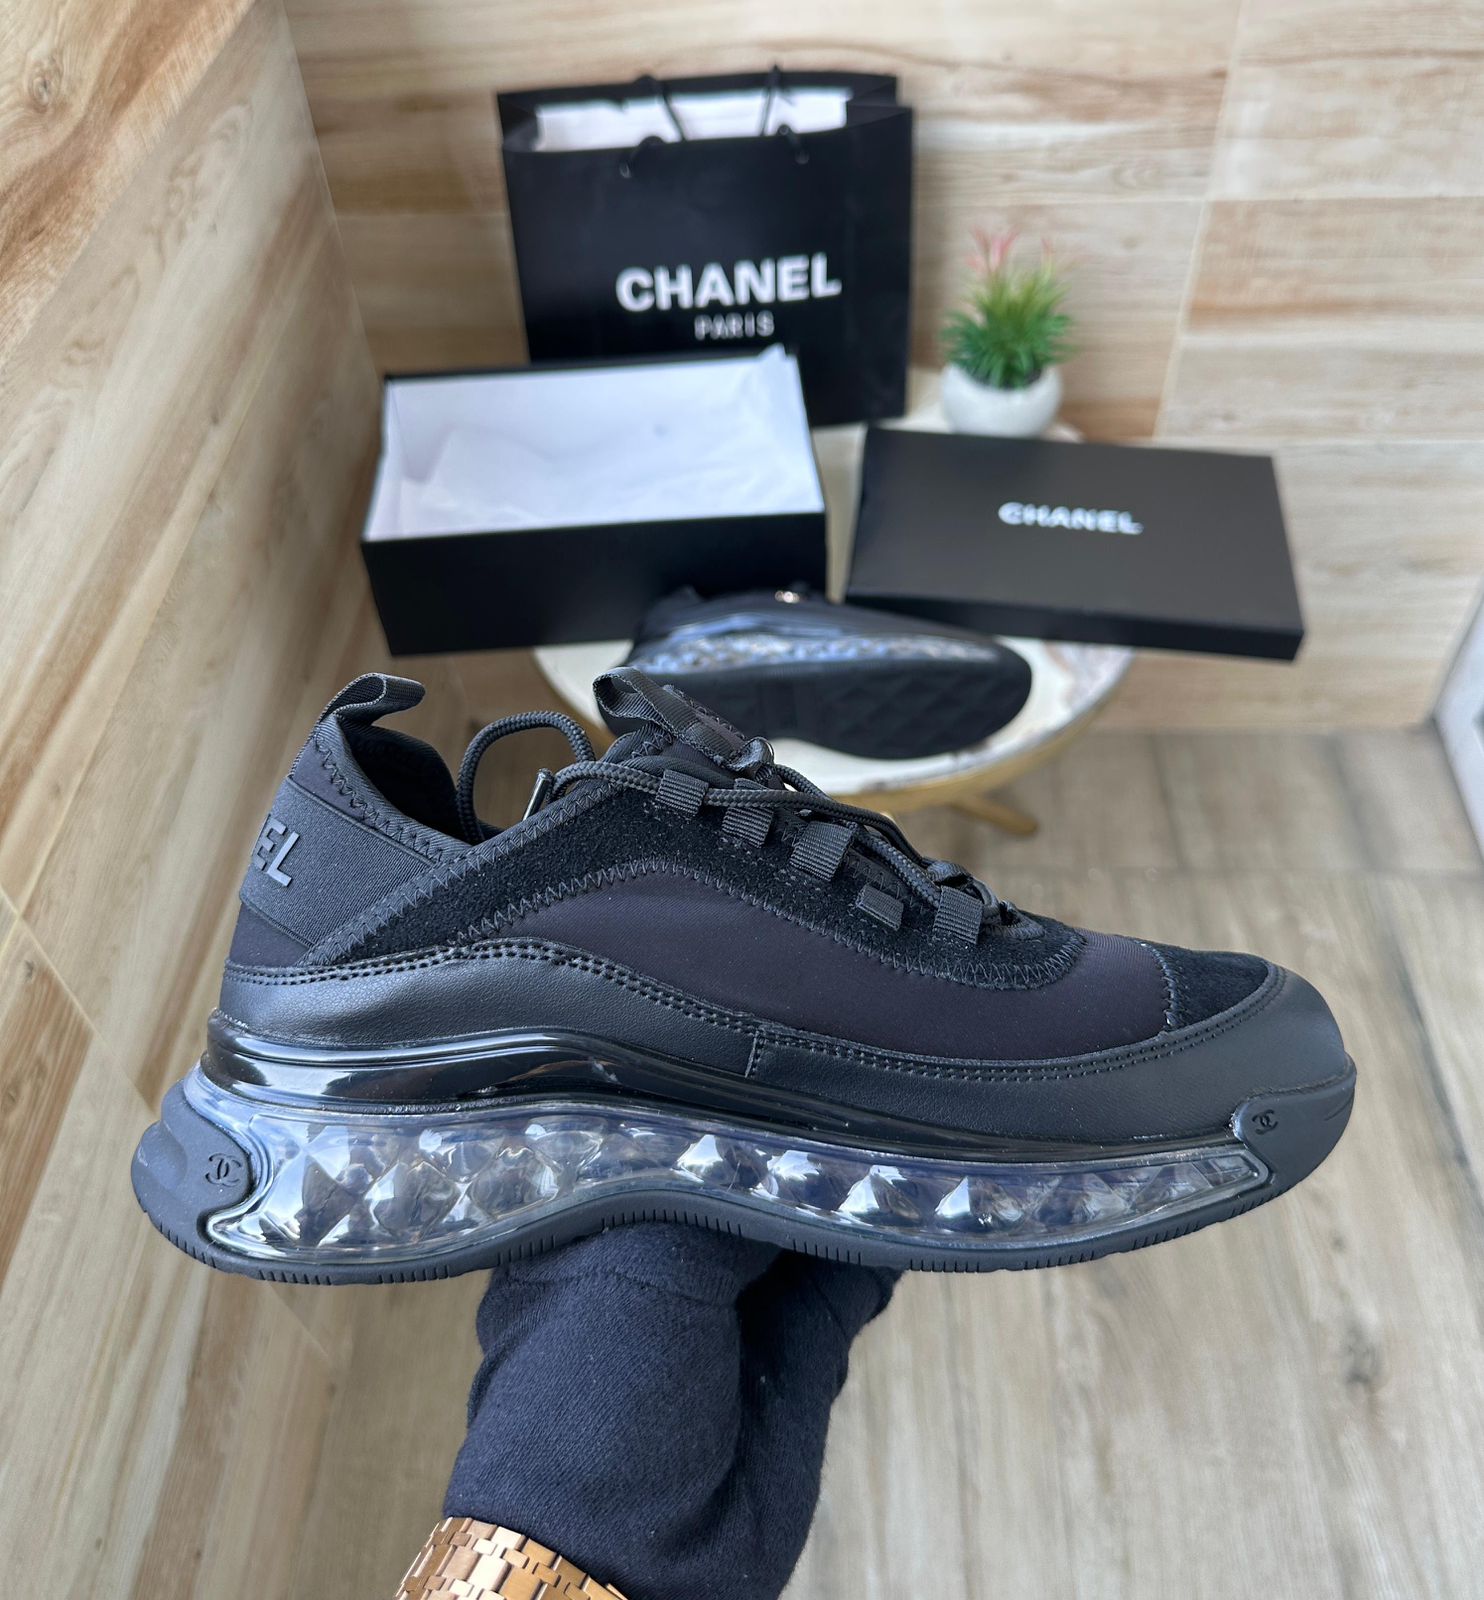 Chanel First Copy Sneakers In Stock